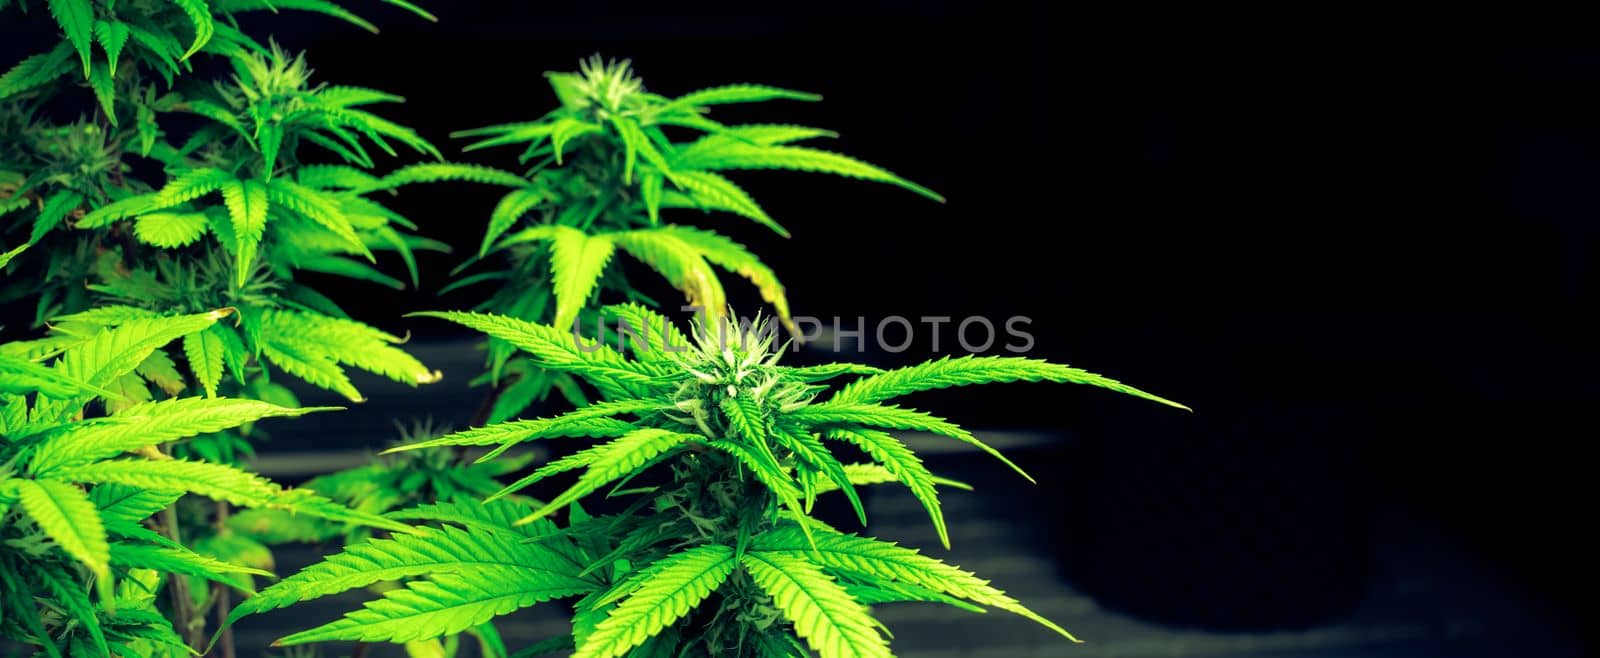 Closeup single cannabis plant with gratifying full grown buds ready to be harvested in curative indoor medicinal cannabis farm. Cannabis plant in grow facility for high quality.